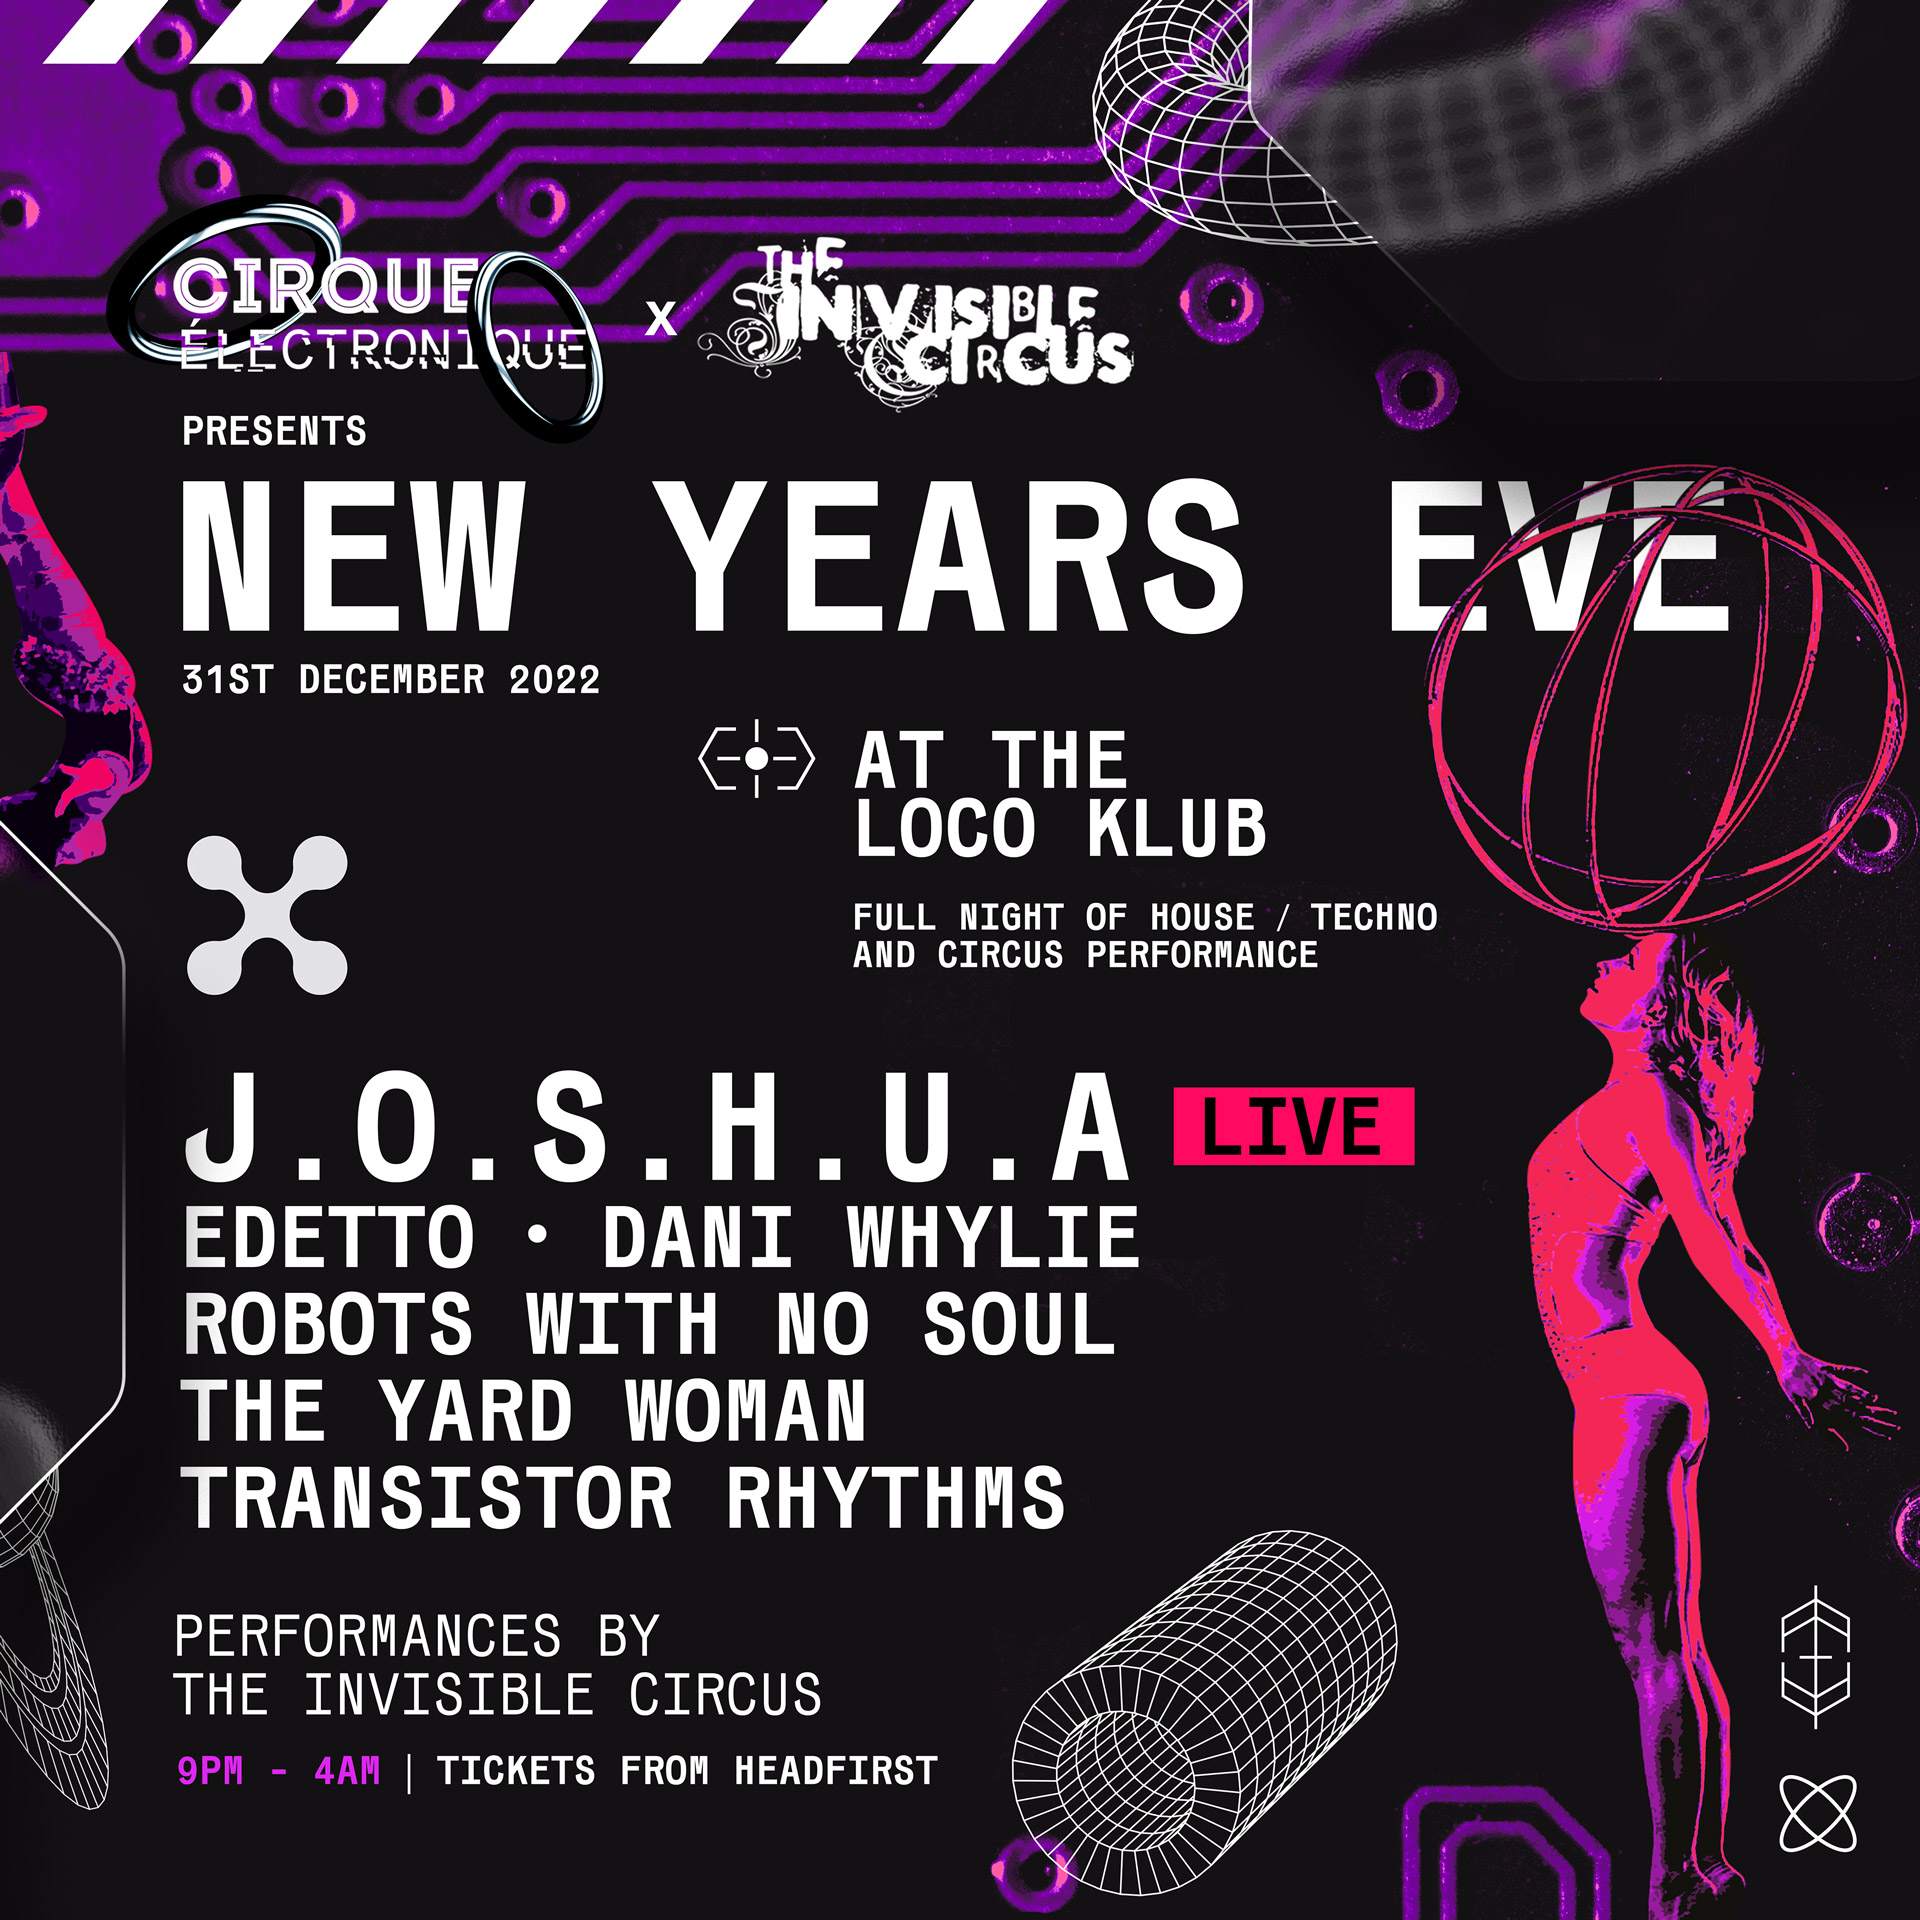 New Years Eve - CIRQUE ÉLECTRONIQUE x The Invisible Circus - フライヤー表